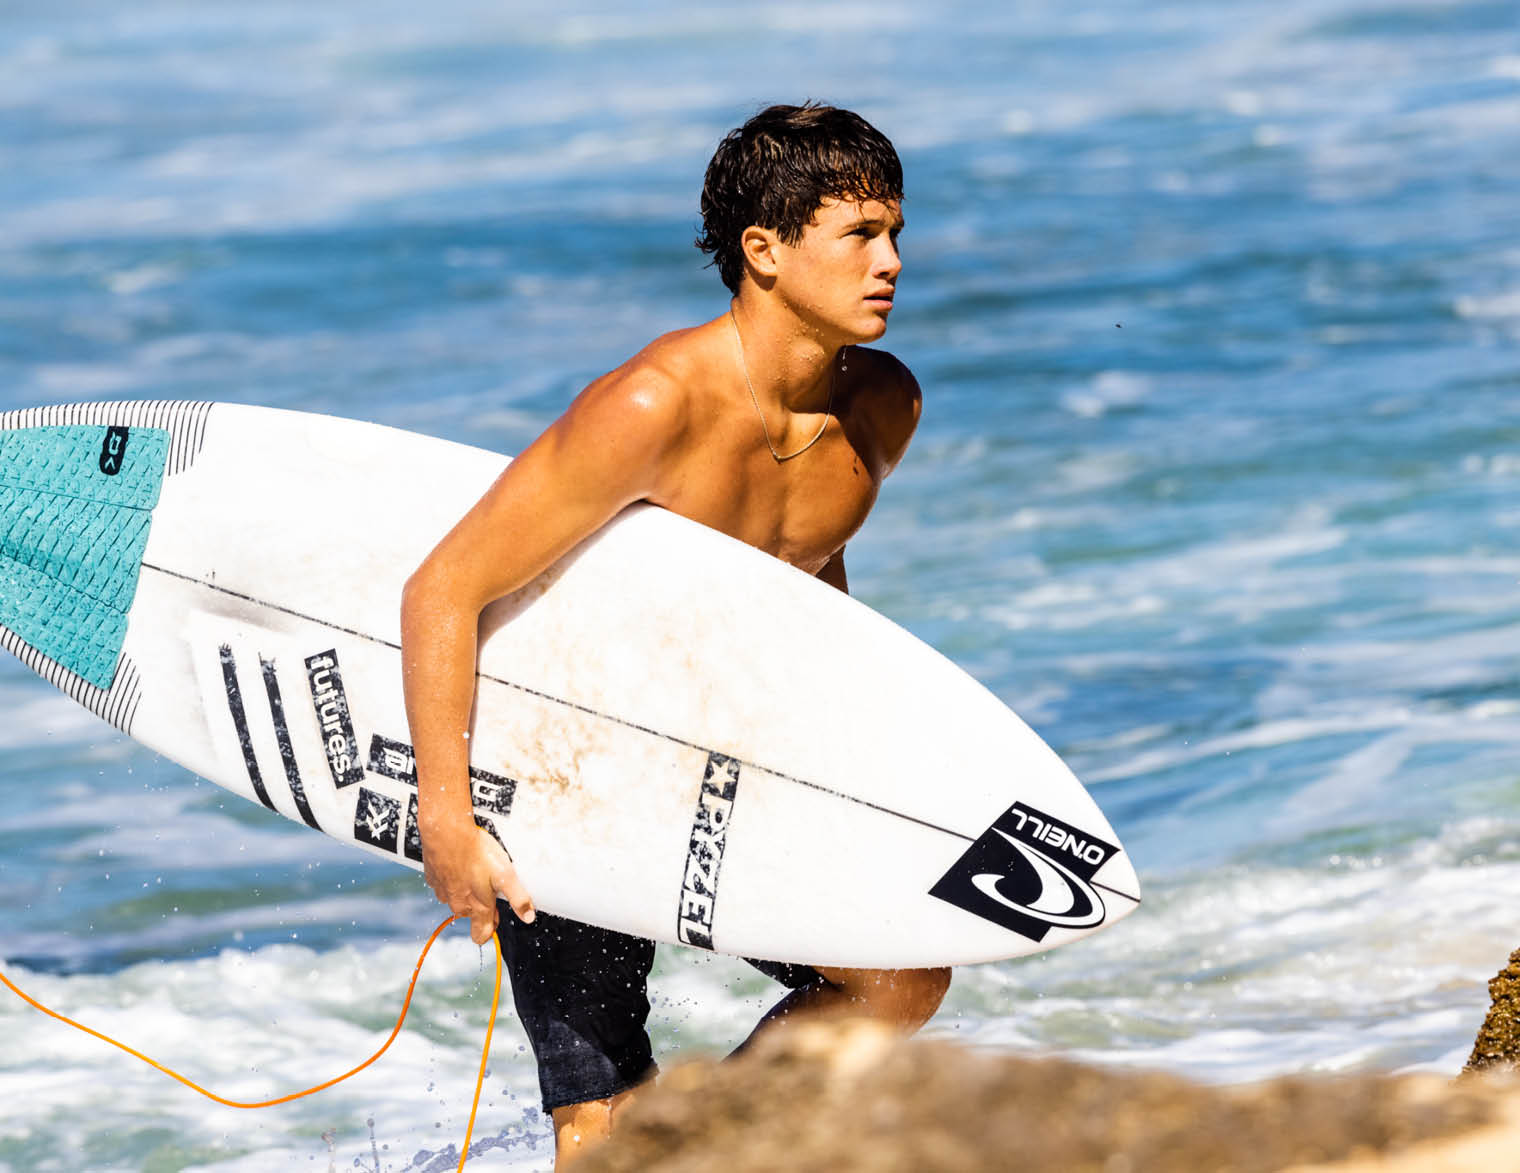 WATCH: GROWING UP AT PIPELINE WITH THATCHER JOHNSON